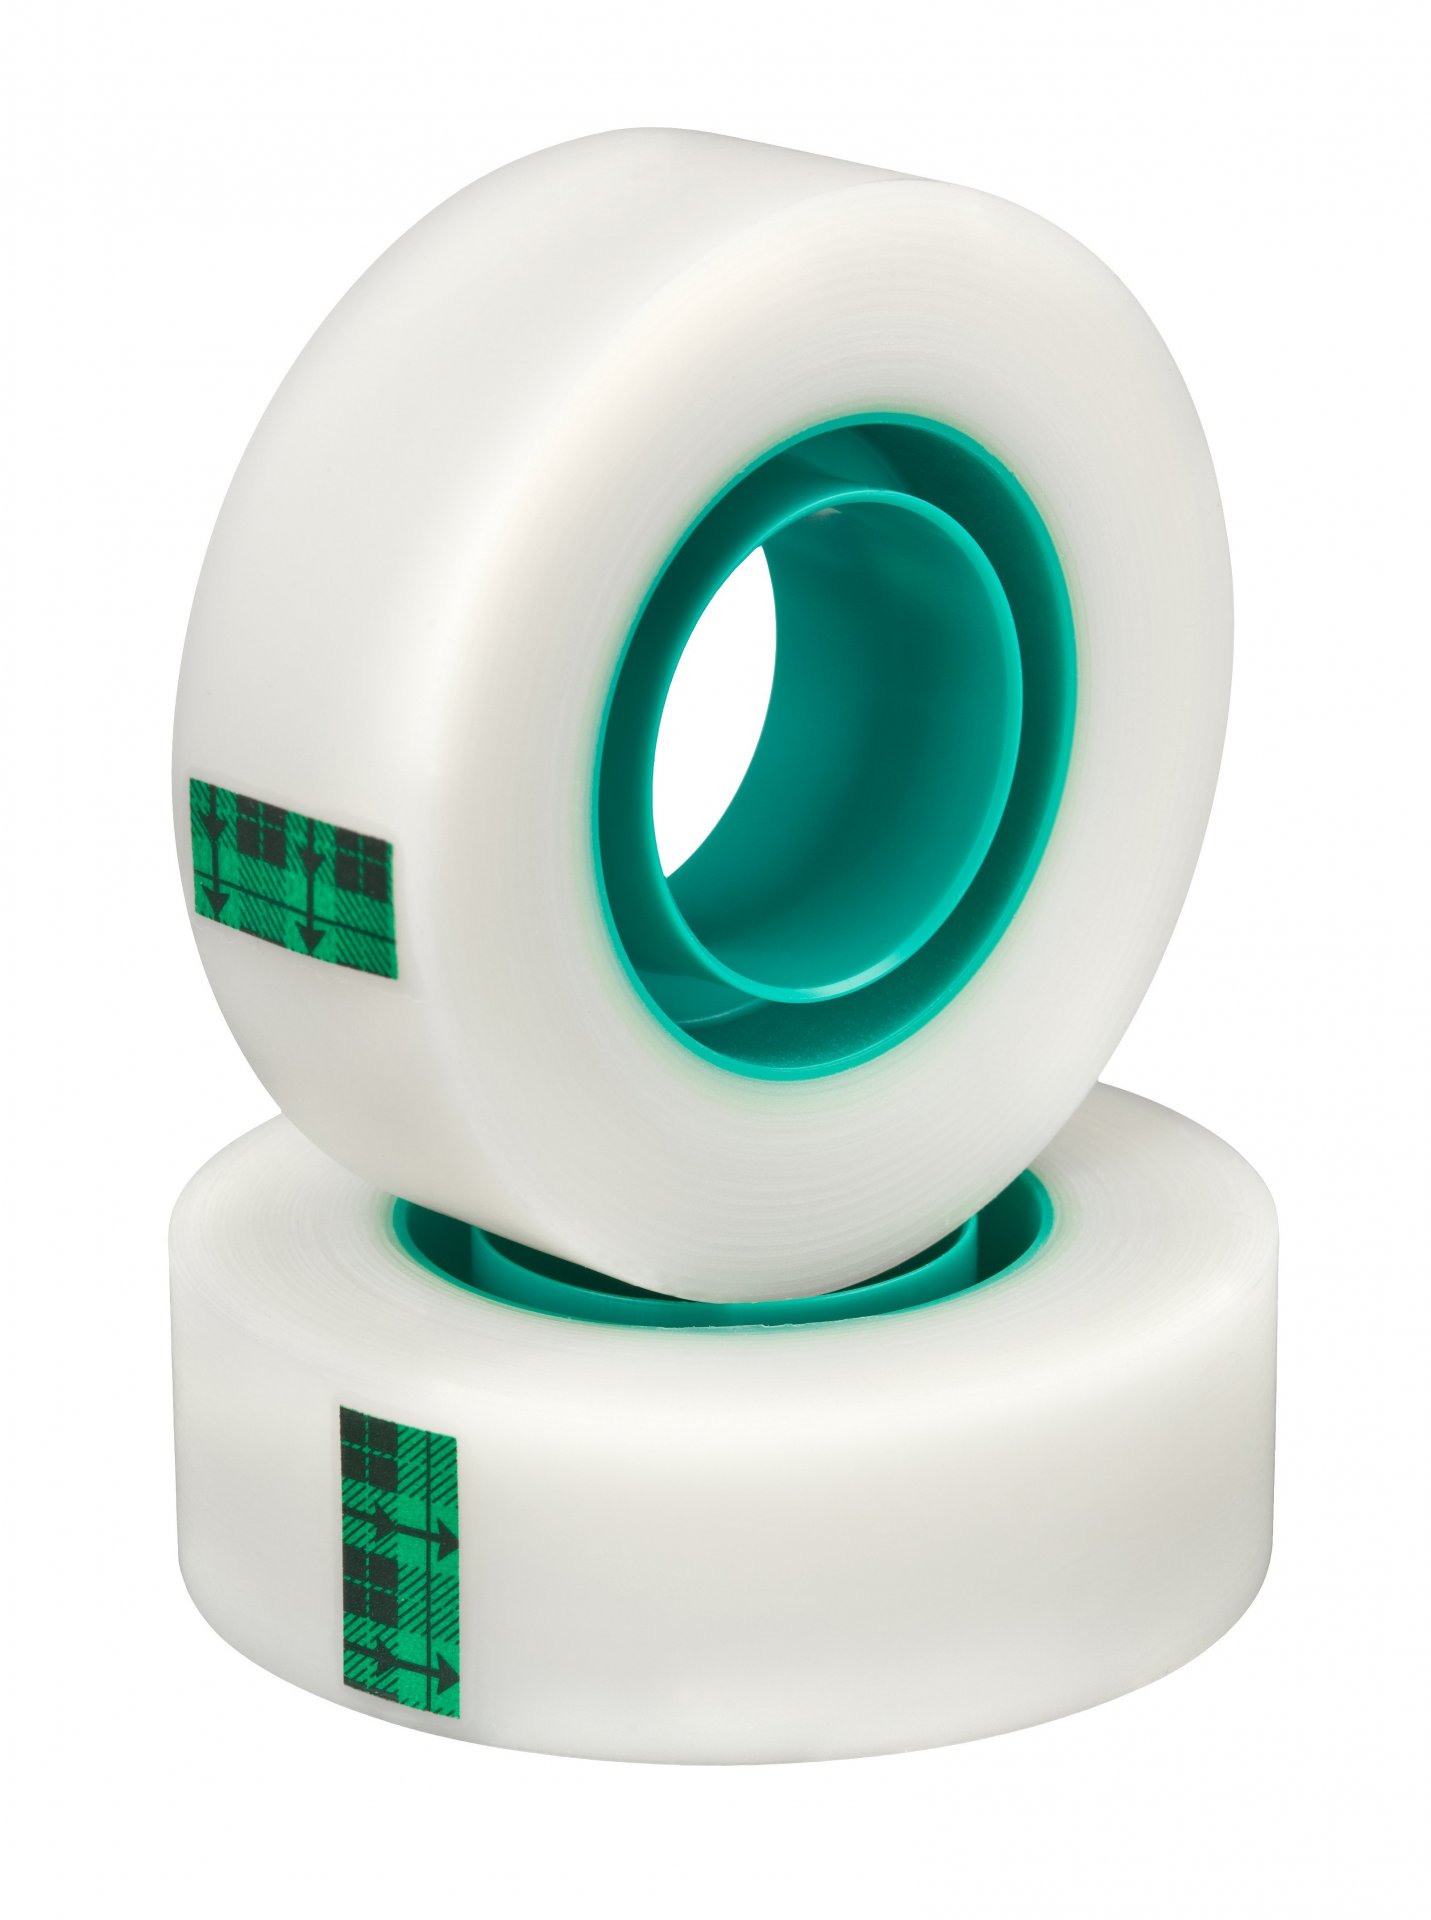 Buy 3M Scotch Magic Tape 810 (green), invisible online at Modulor